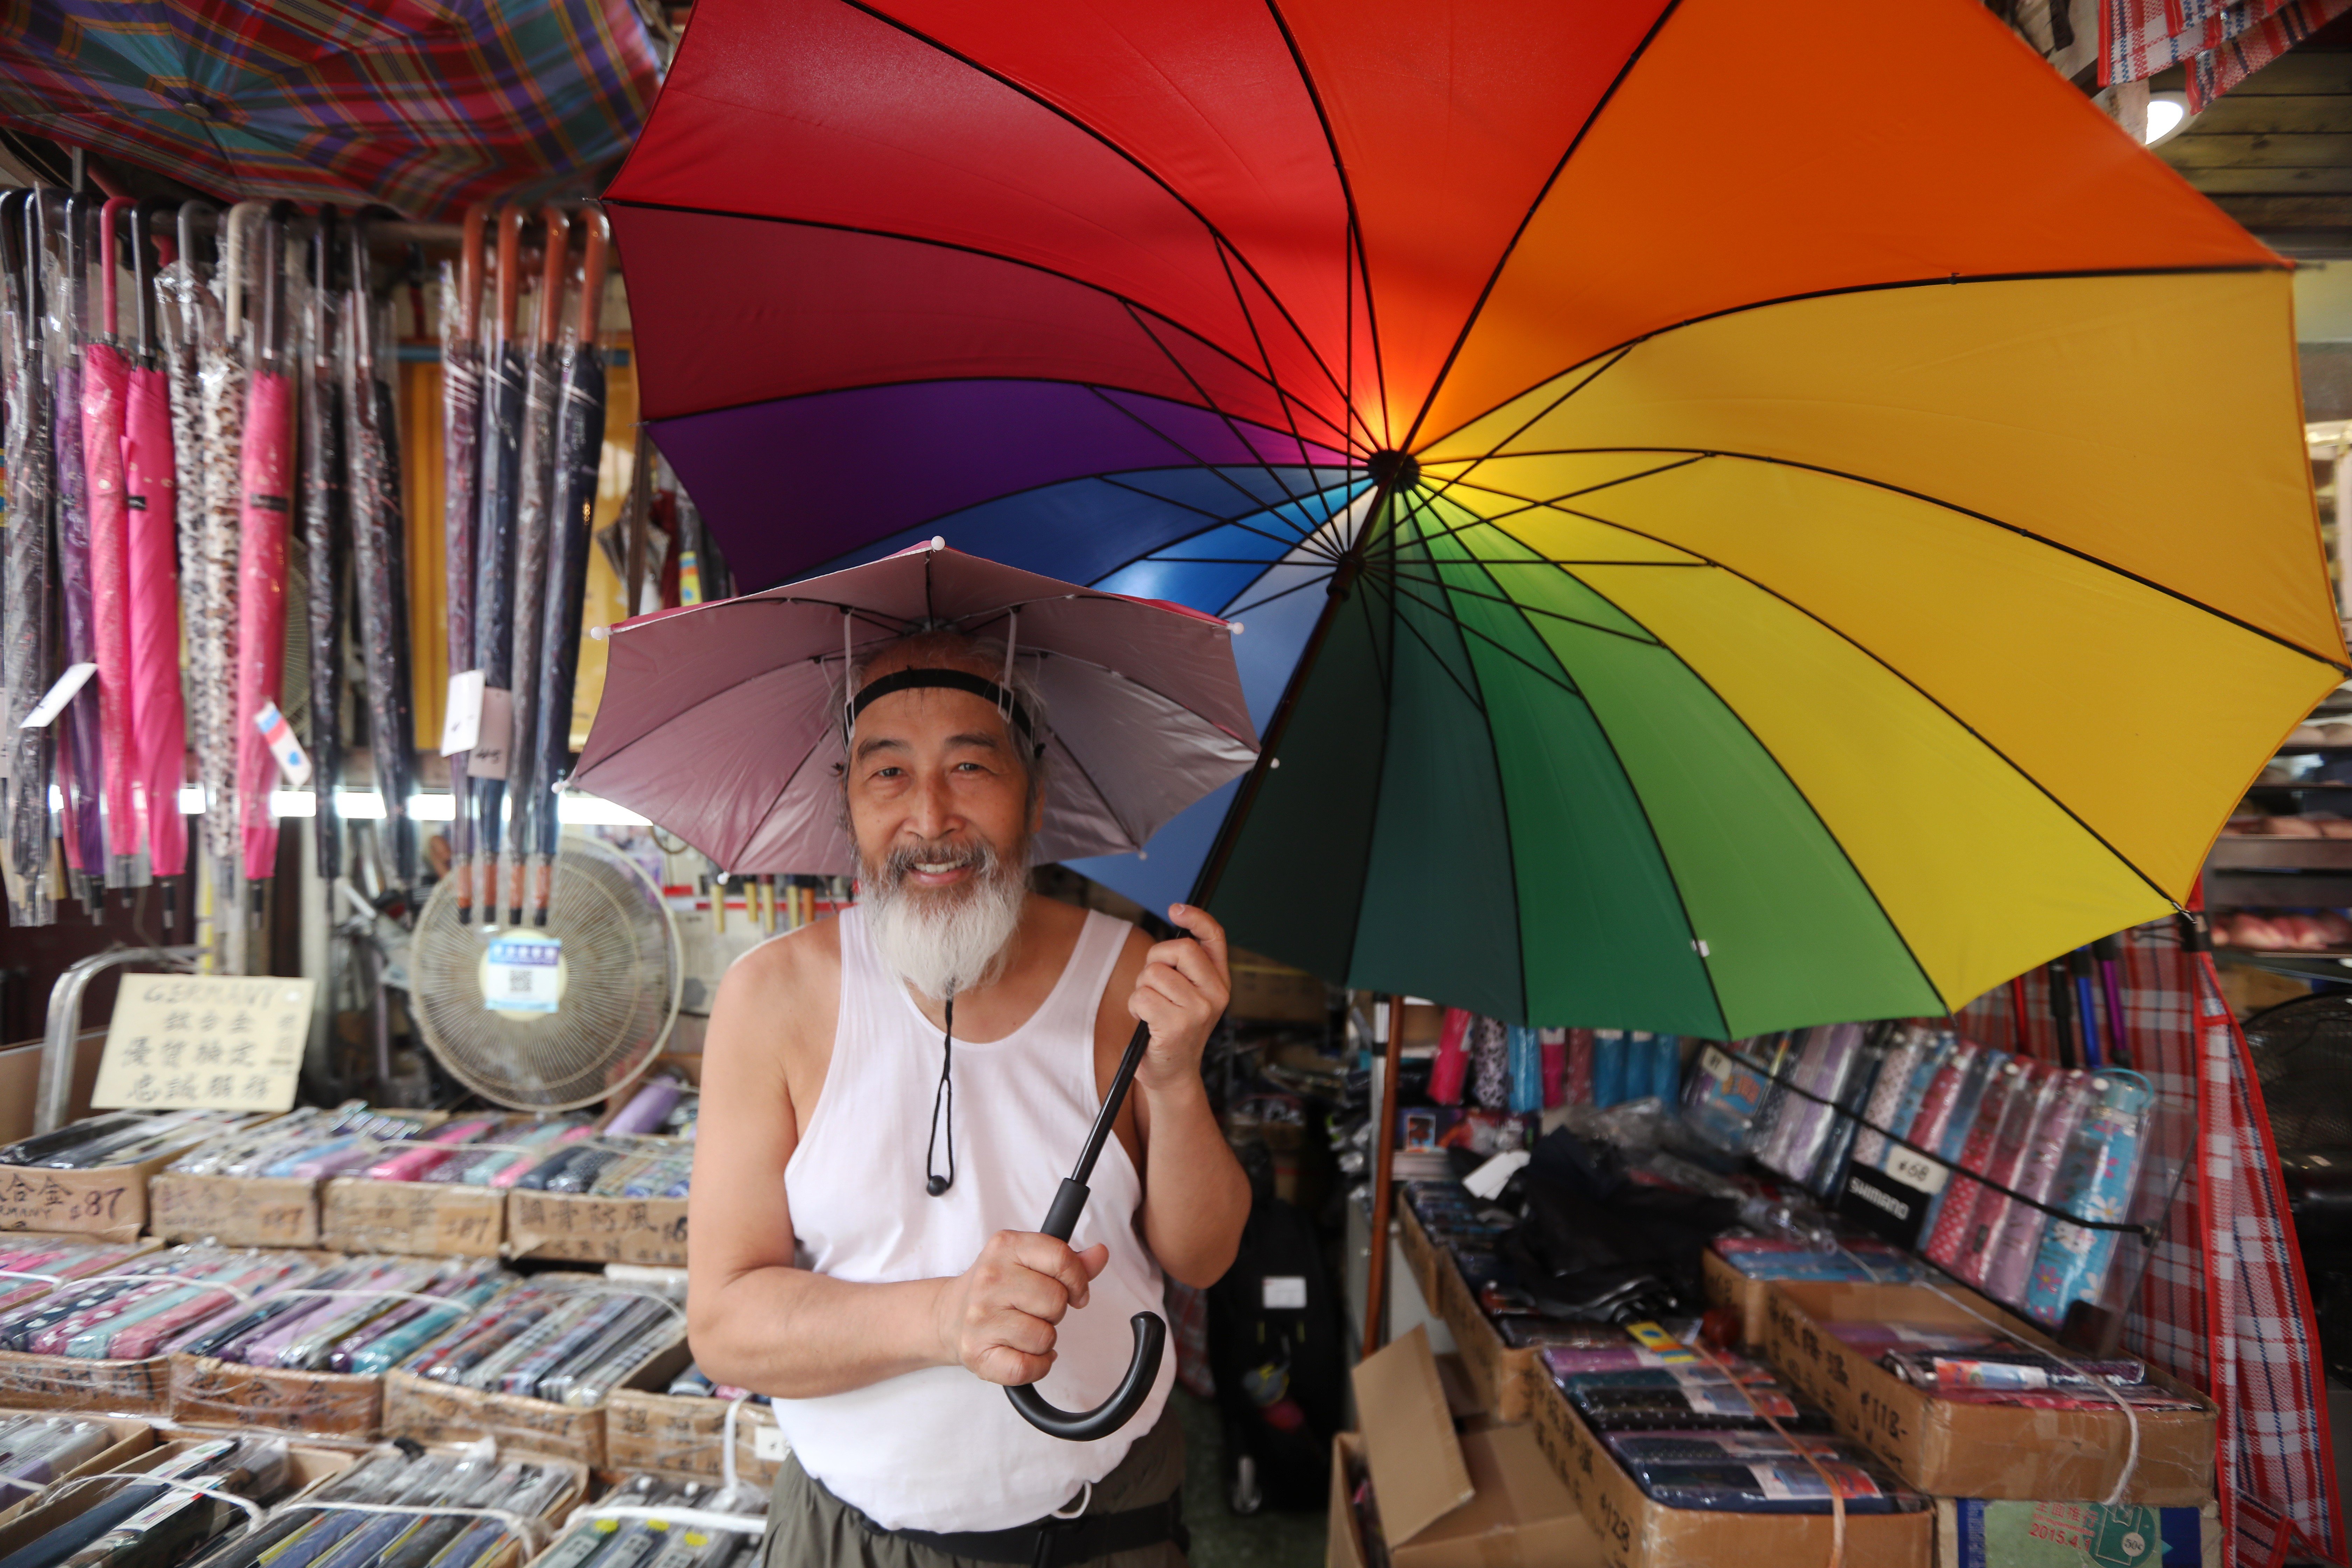 ‘Brother Wai’, as Yau is affectionately known, is a fifth-generation umbrella salesman and repairman. Photo: Xiaomei Chen